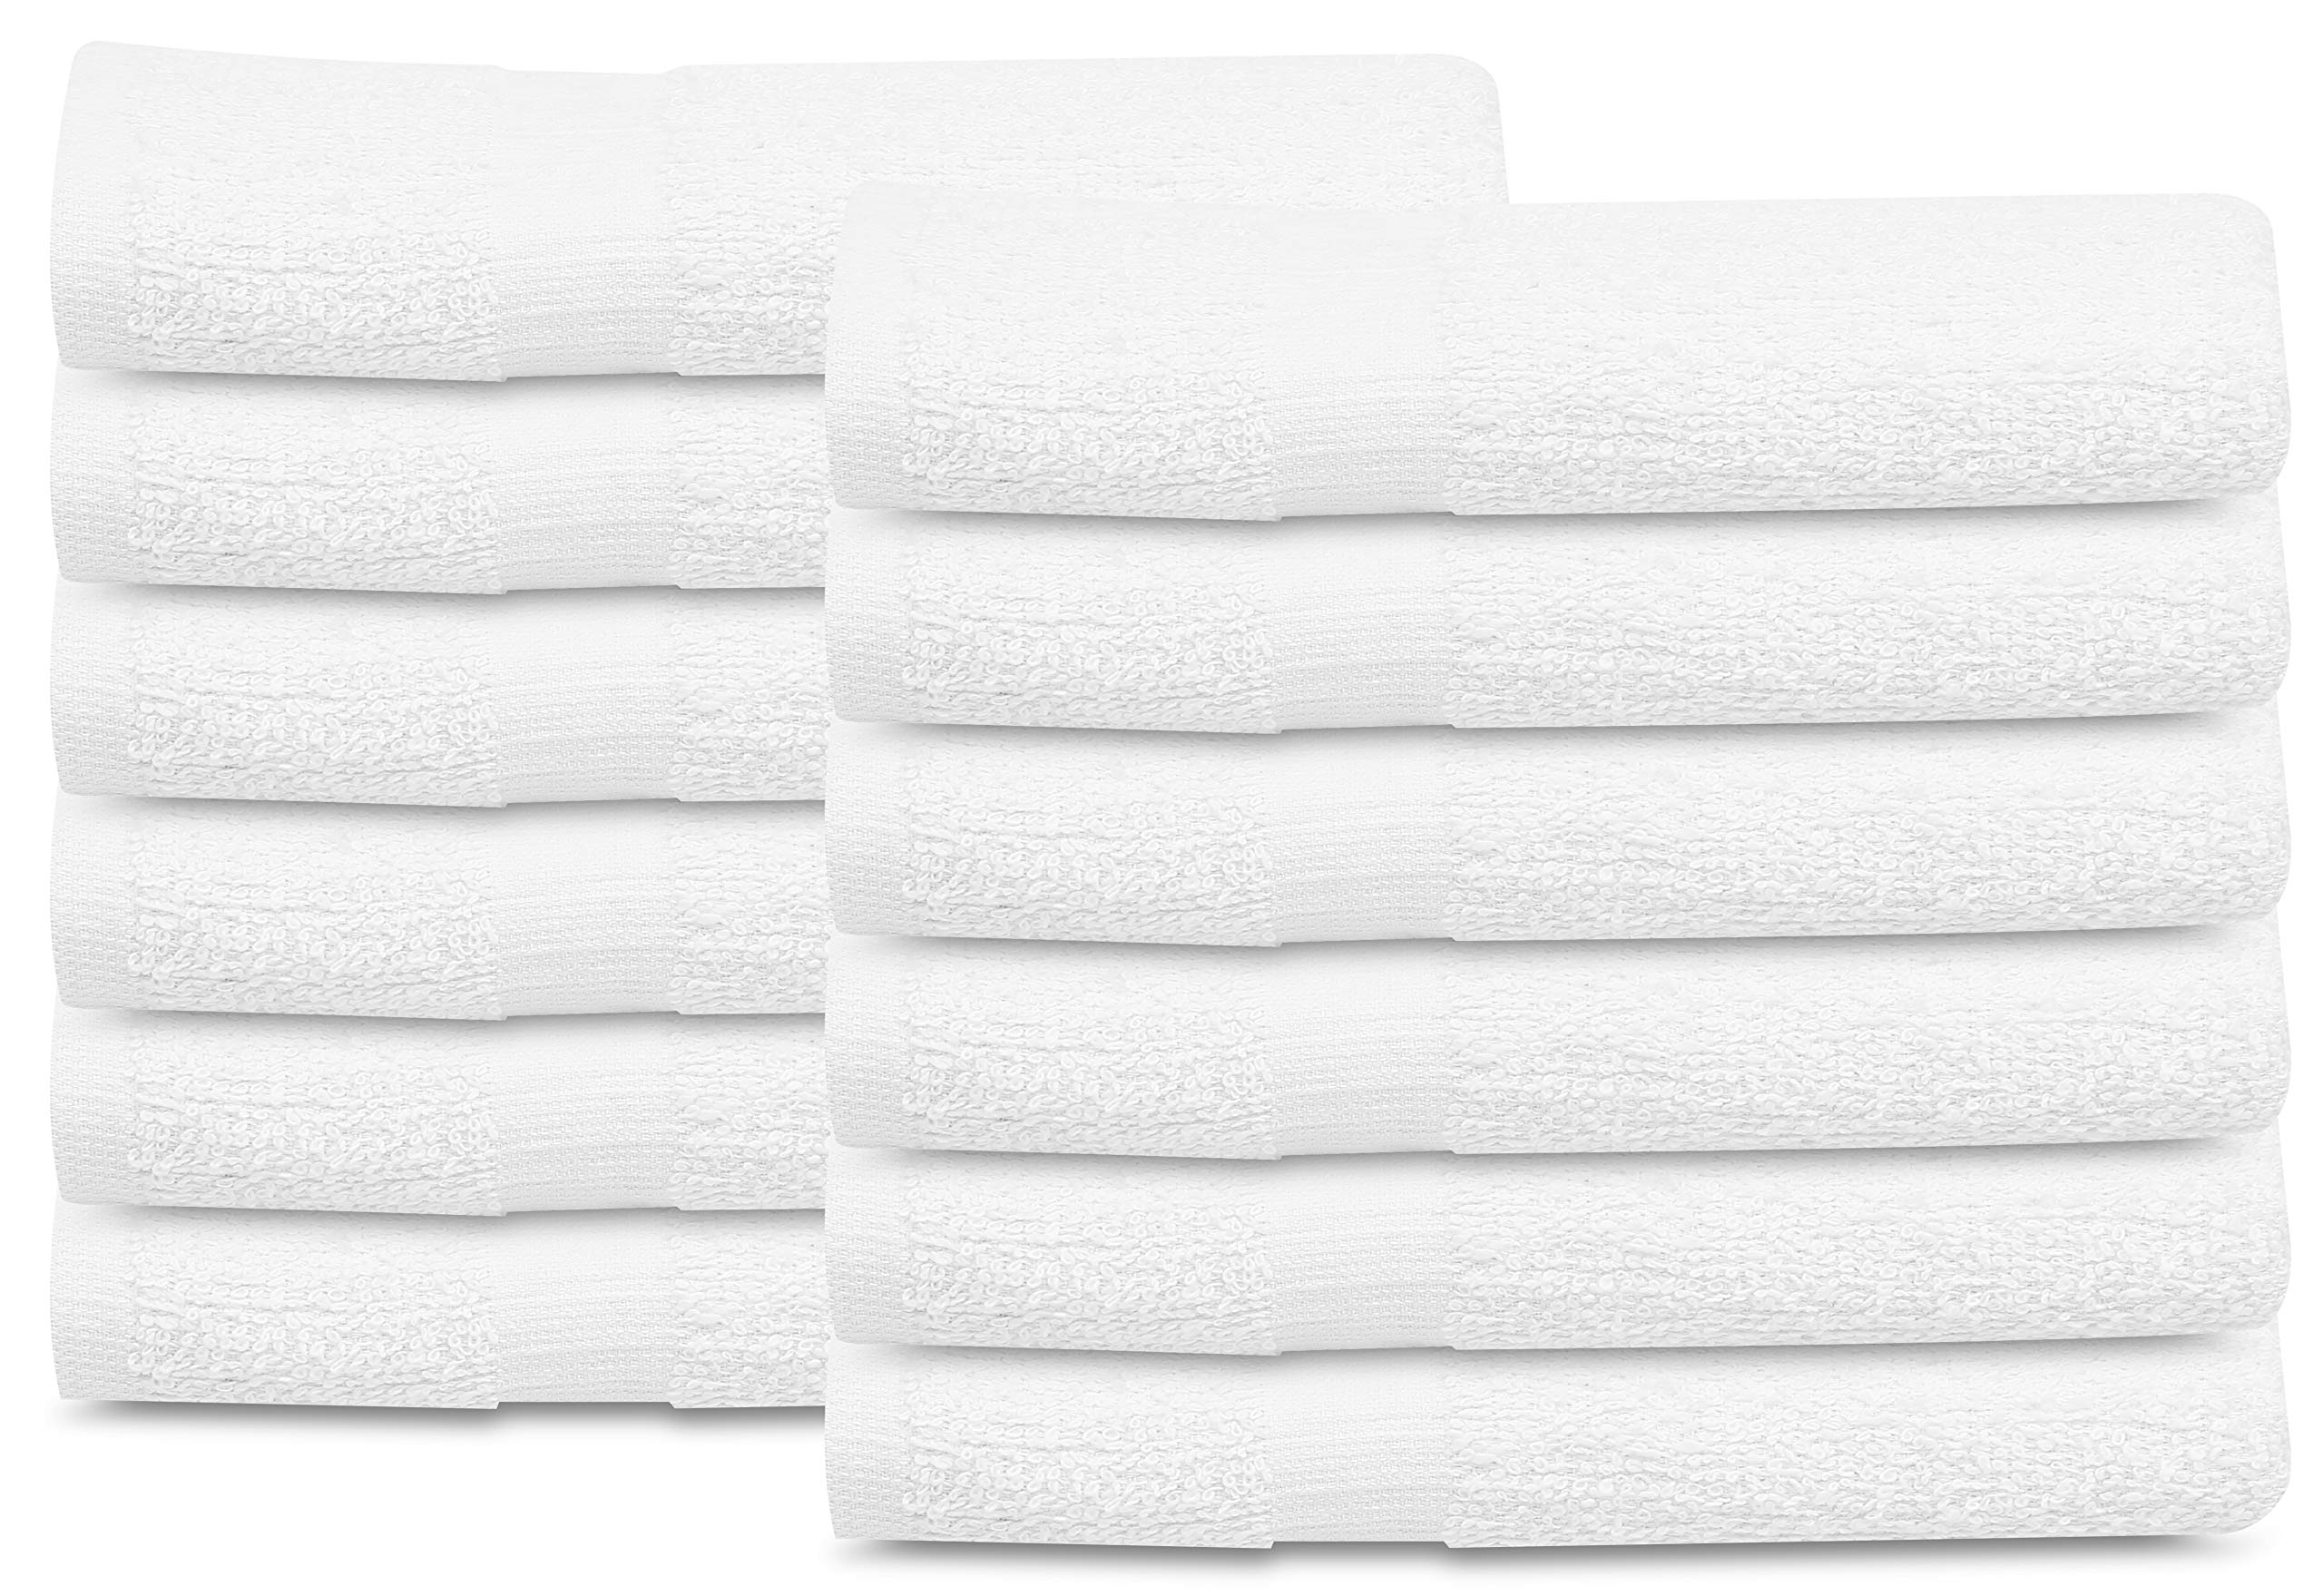 GOLD TEXTILES 12 PCS White Bath Towels Bulk (24x50 Inches) - Light Weight  Easy-Care Commercial Grade (12)